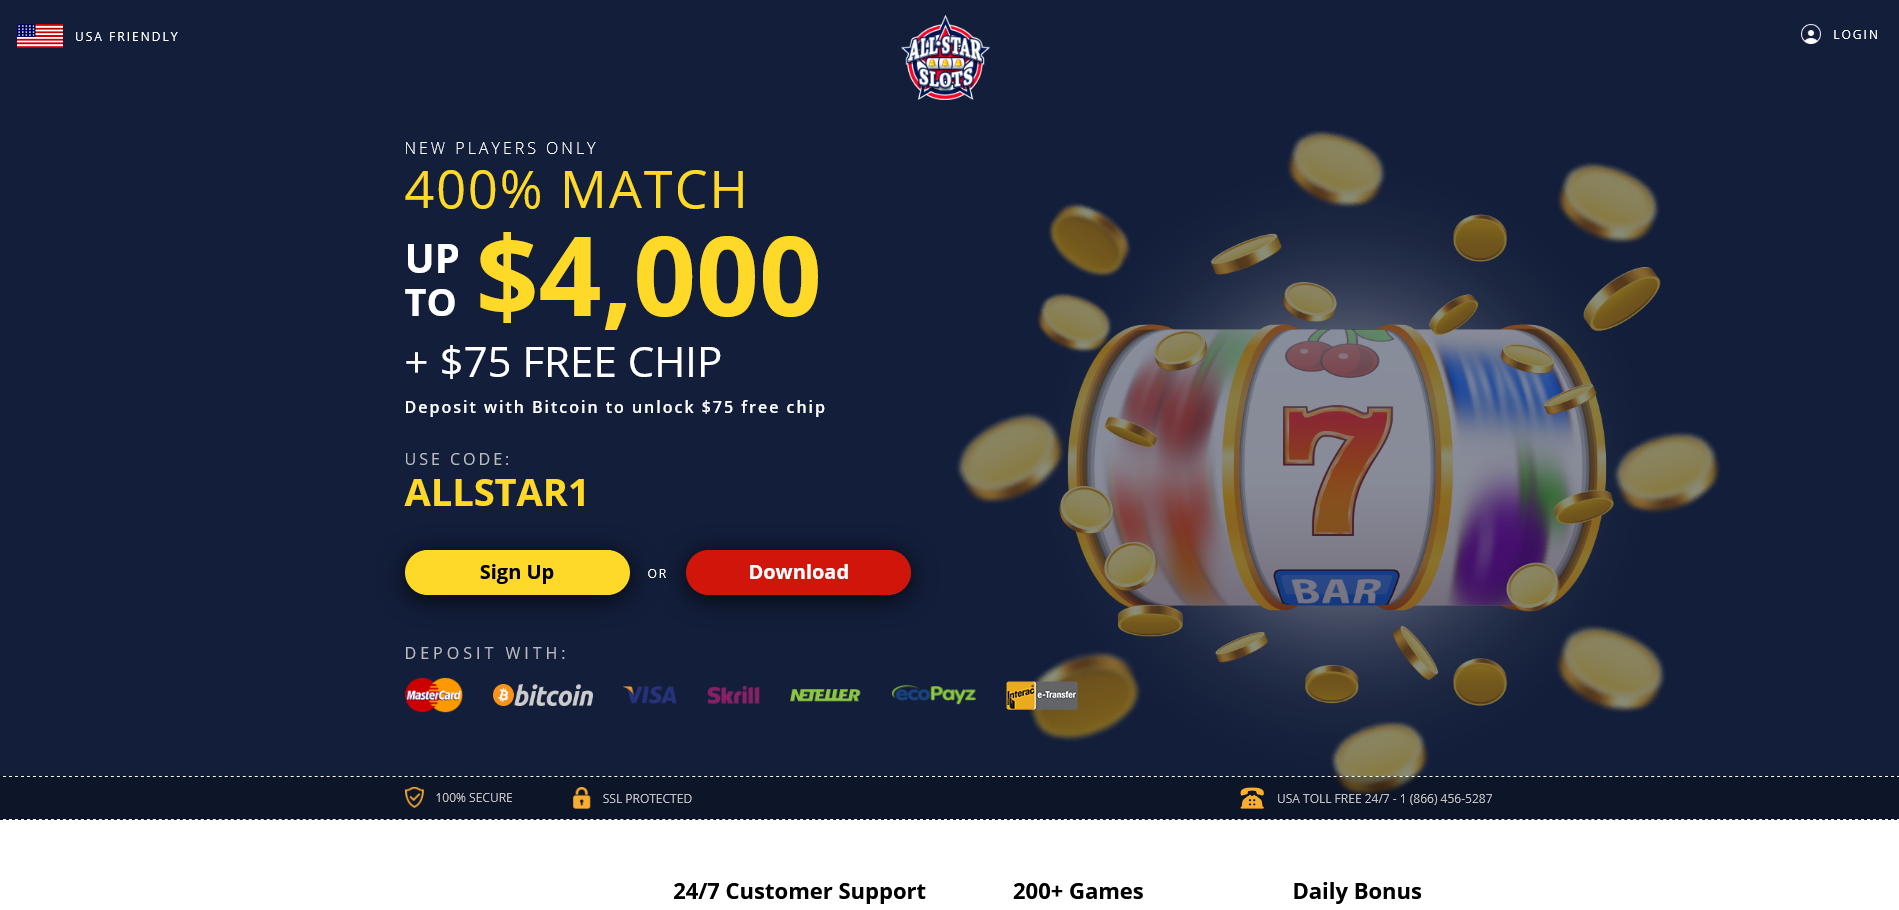 400% MATCH
                                UP TO $4,000 + $75 FREE CHIP Deposit
                                with Bitcoin to unlock $75 free chip USE
                                CODE: ALLSTAR1